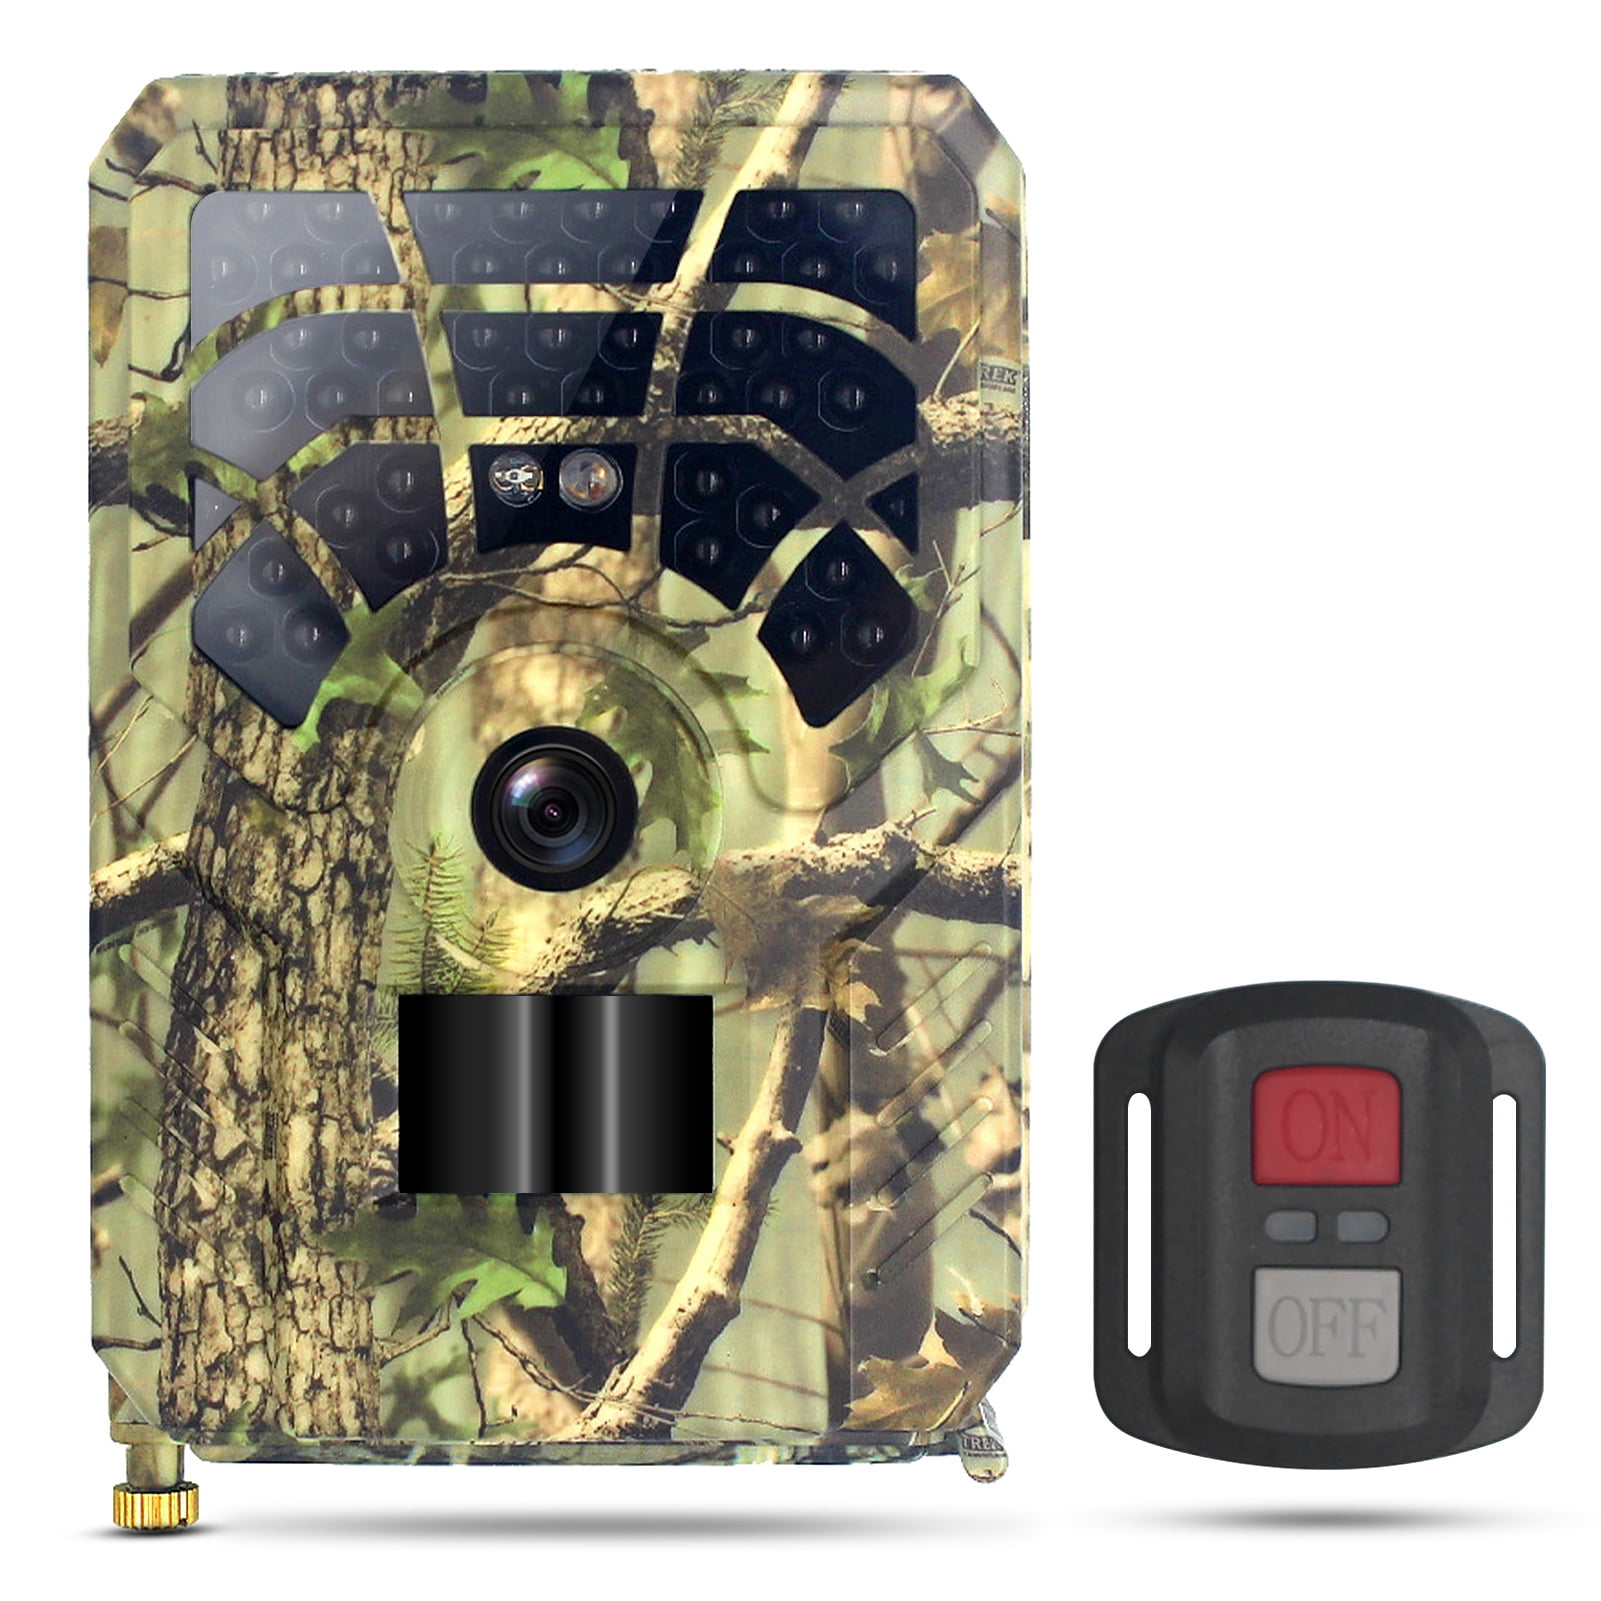 Details about   Live Video WiFi Bluetooth Trail Camera 24MP 1296P Glow IR Night Vision Outdoor